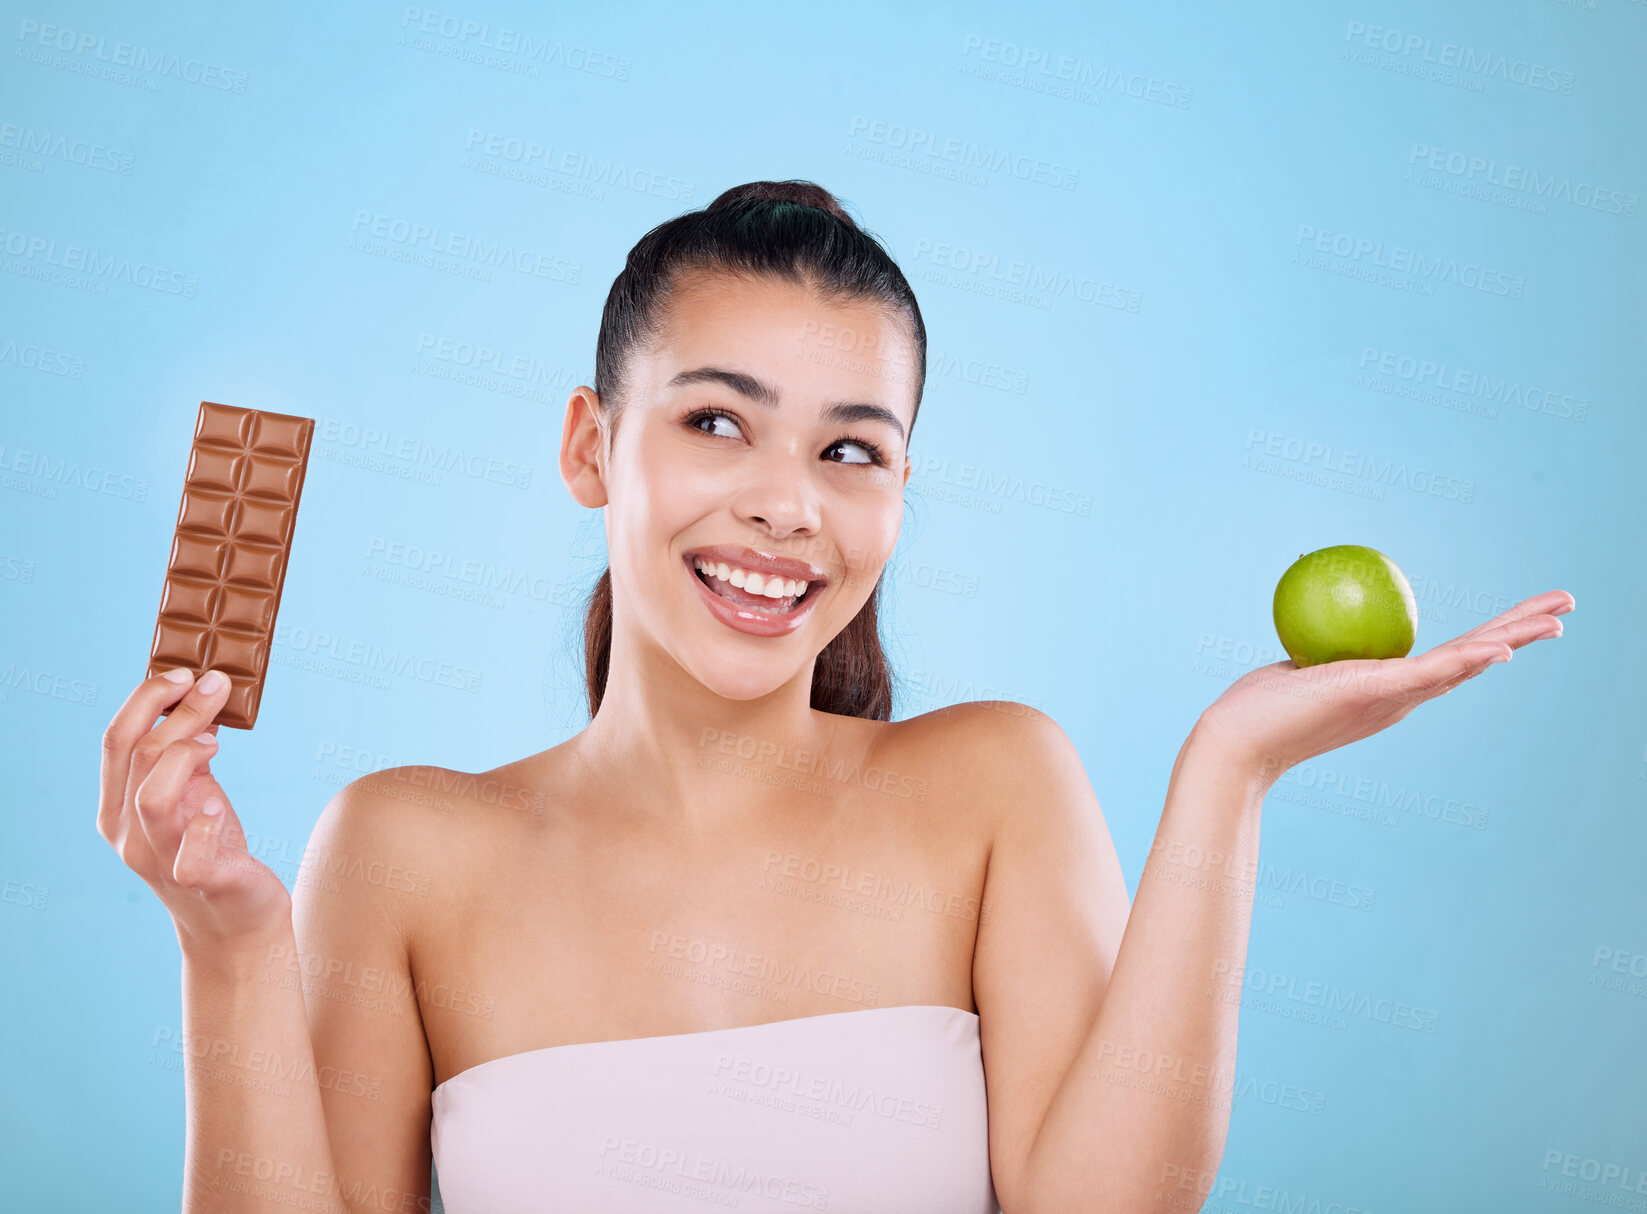 Buy stock photo Studio shot an attractive young woman deciding between a chocolate and an apple against a blue background